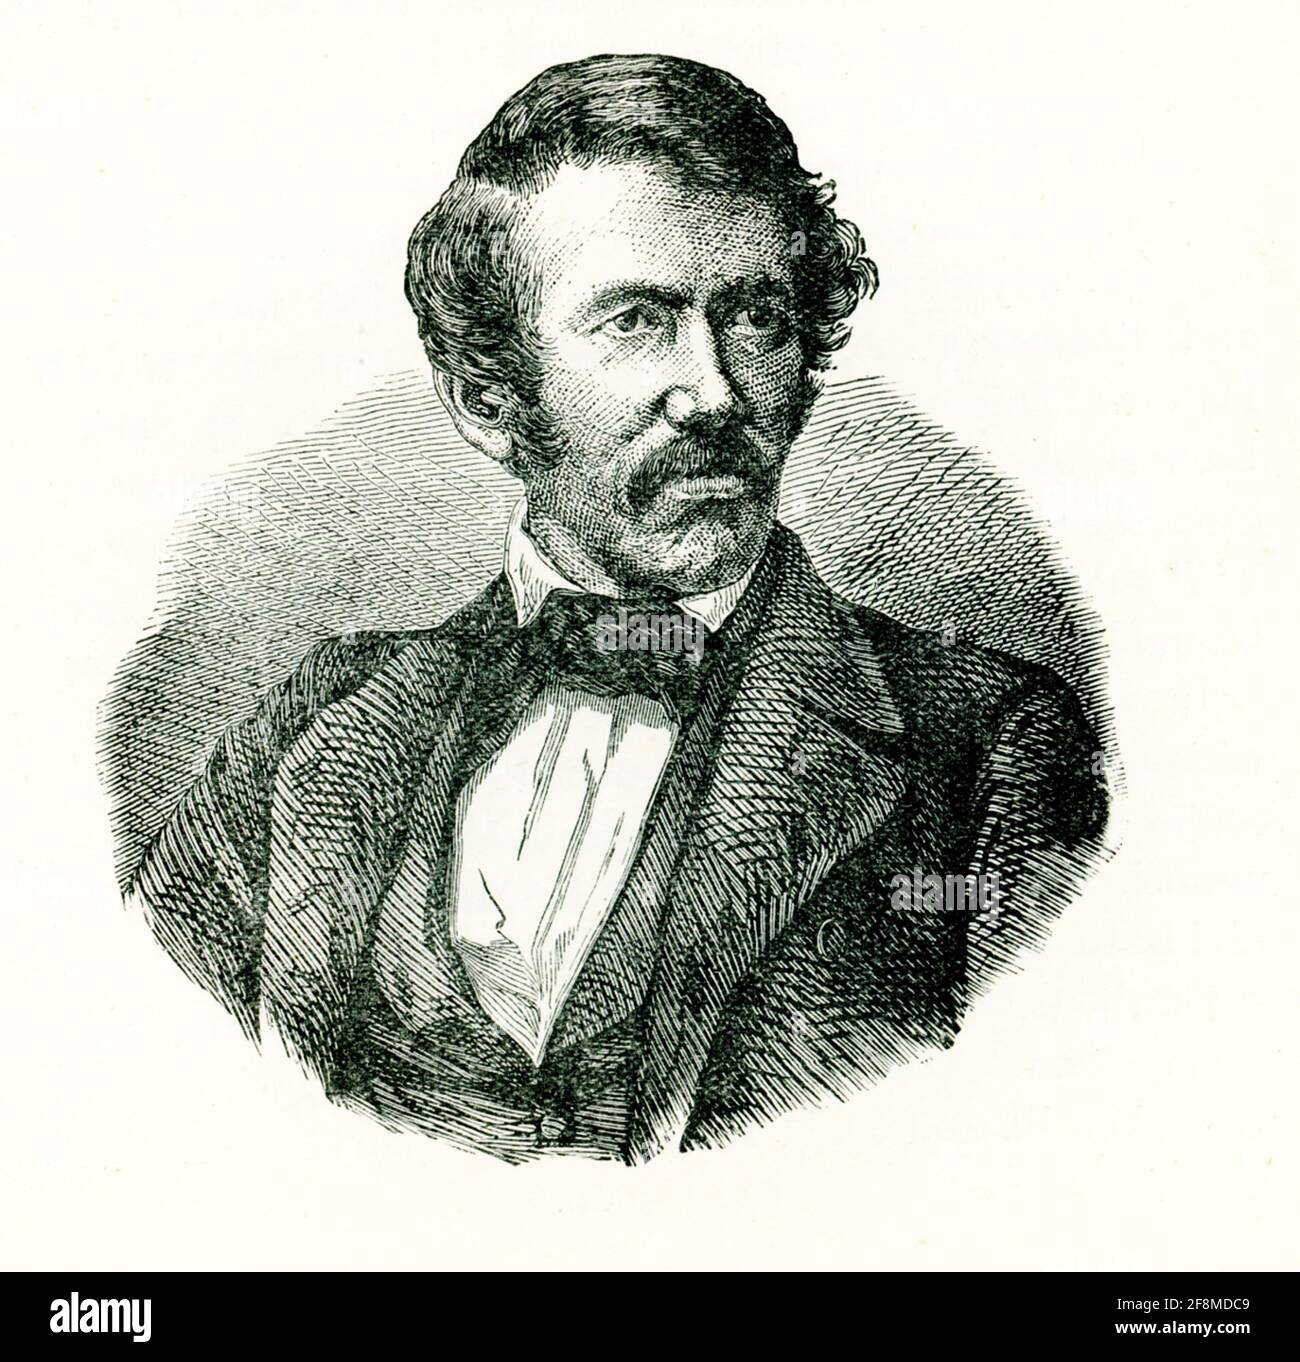 David Livingstone (1813-1873) was a Scottish missionary and explorer in Africa. He discovered Victoria Falls in 1855. When there was no news from him for some time, British explorer Henry Morton Stanley was sent to find him. He did so on November 10, 1871, at the small village of Ujiji near Tanganyika. Stock Photo